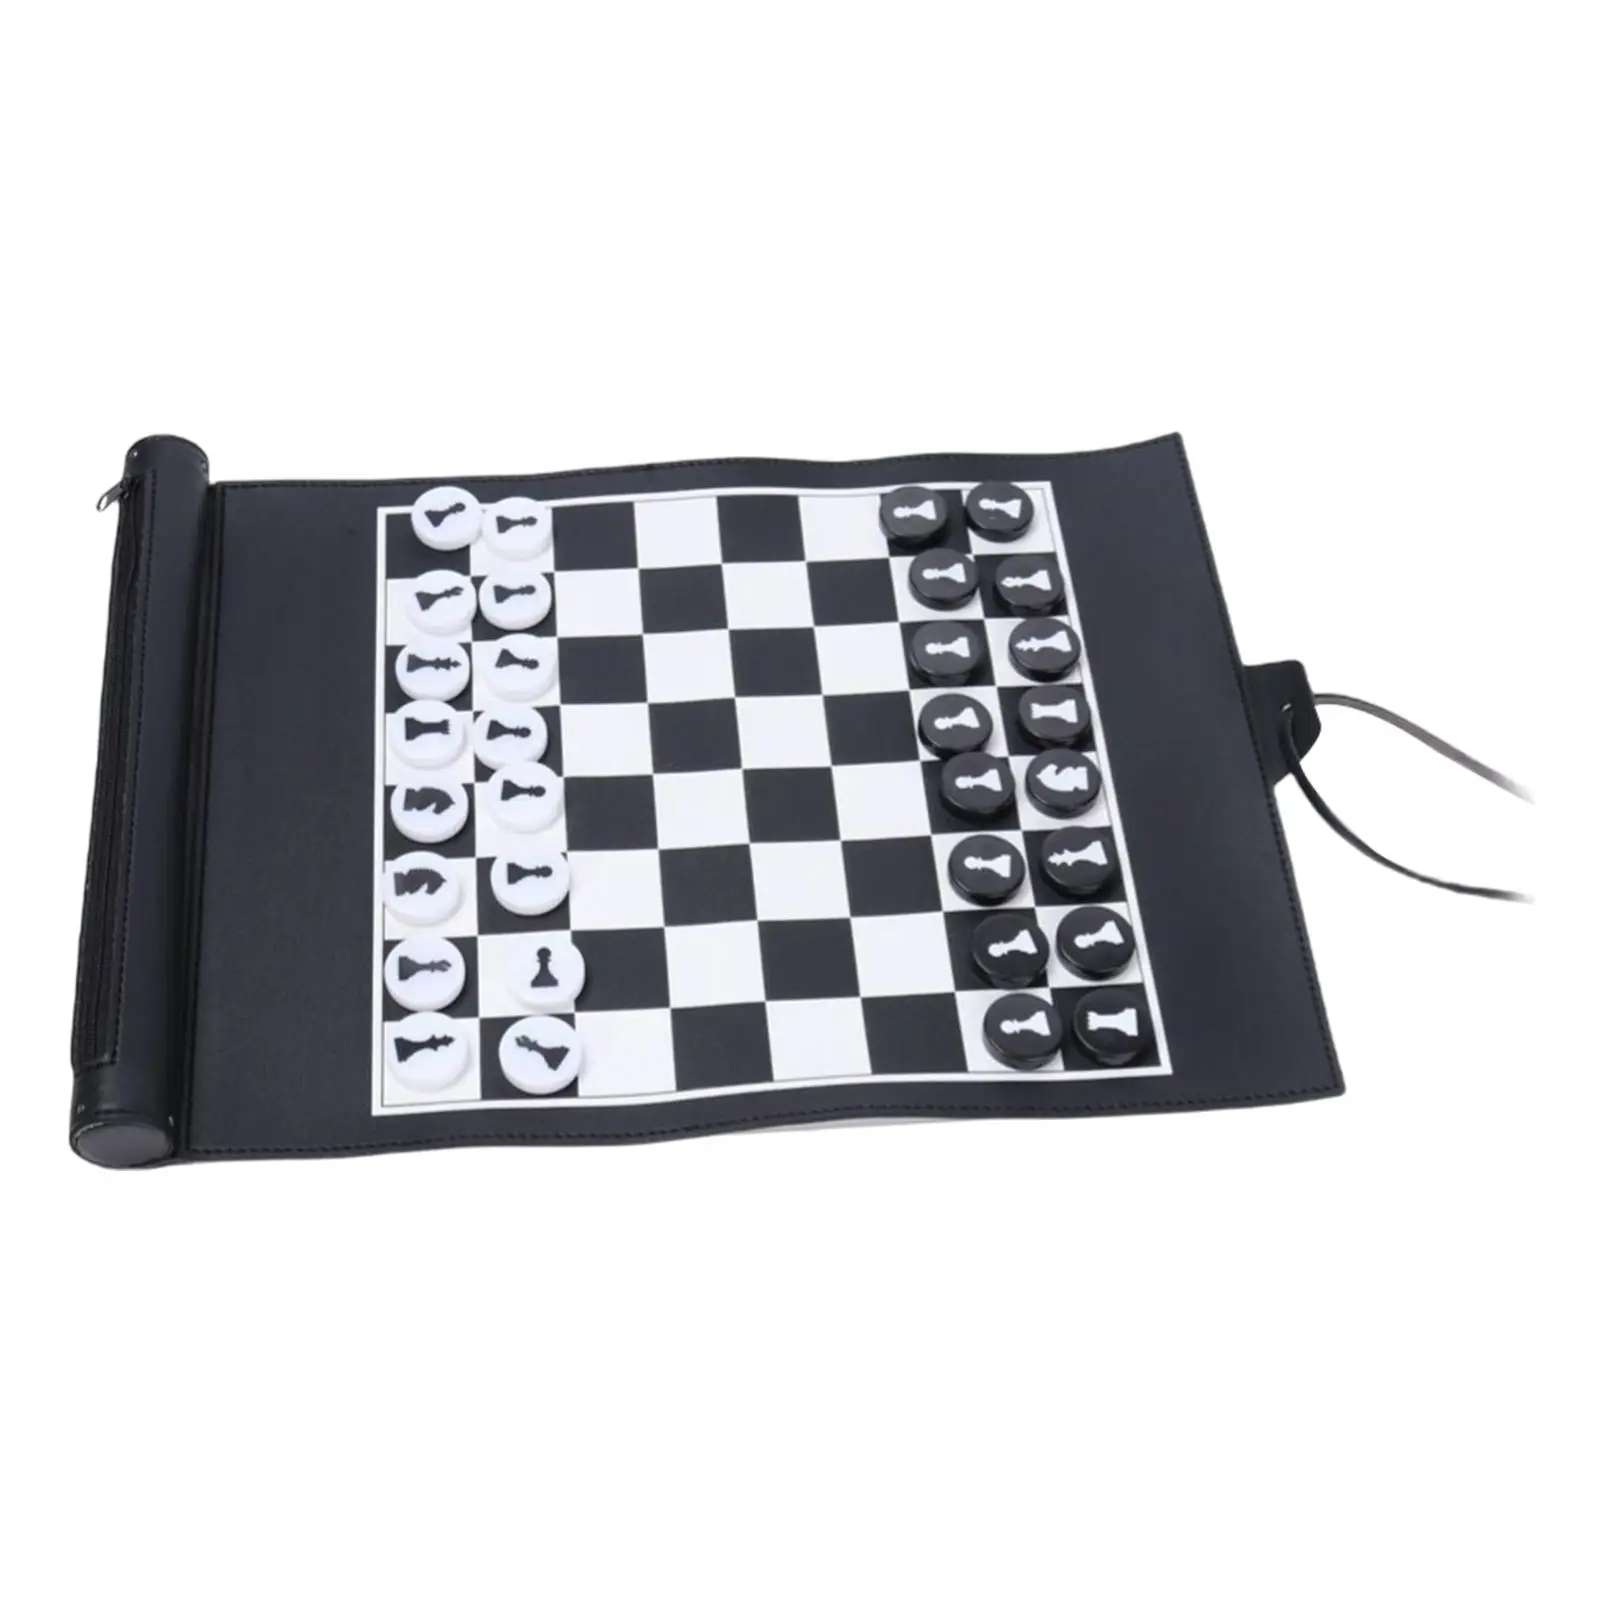 Foldable Traditional Chess, Roll up Chess Set 32 Black White Chess Pieces for Entertainment All Levels Travel Games Teens Family